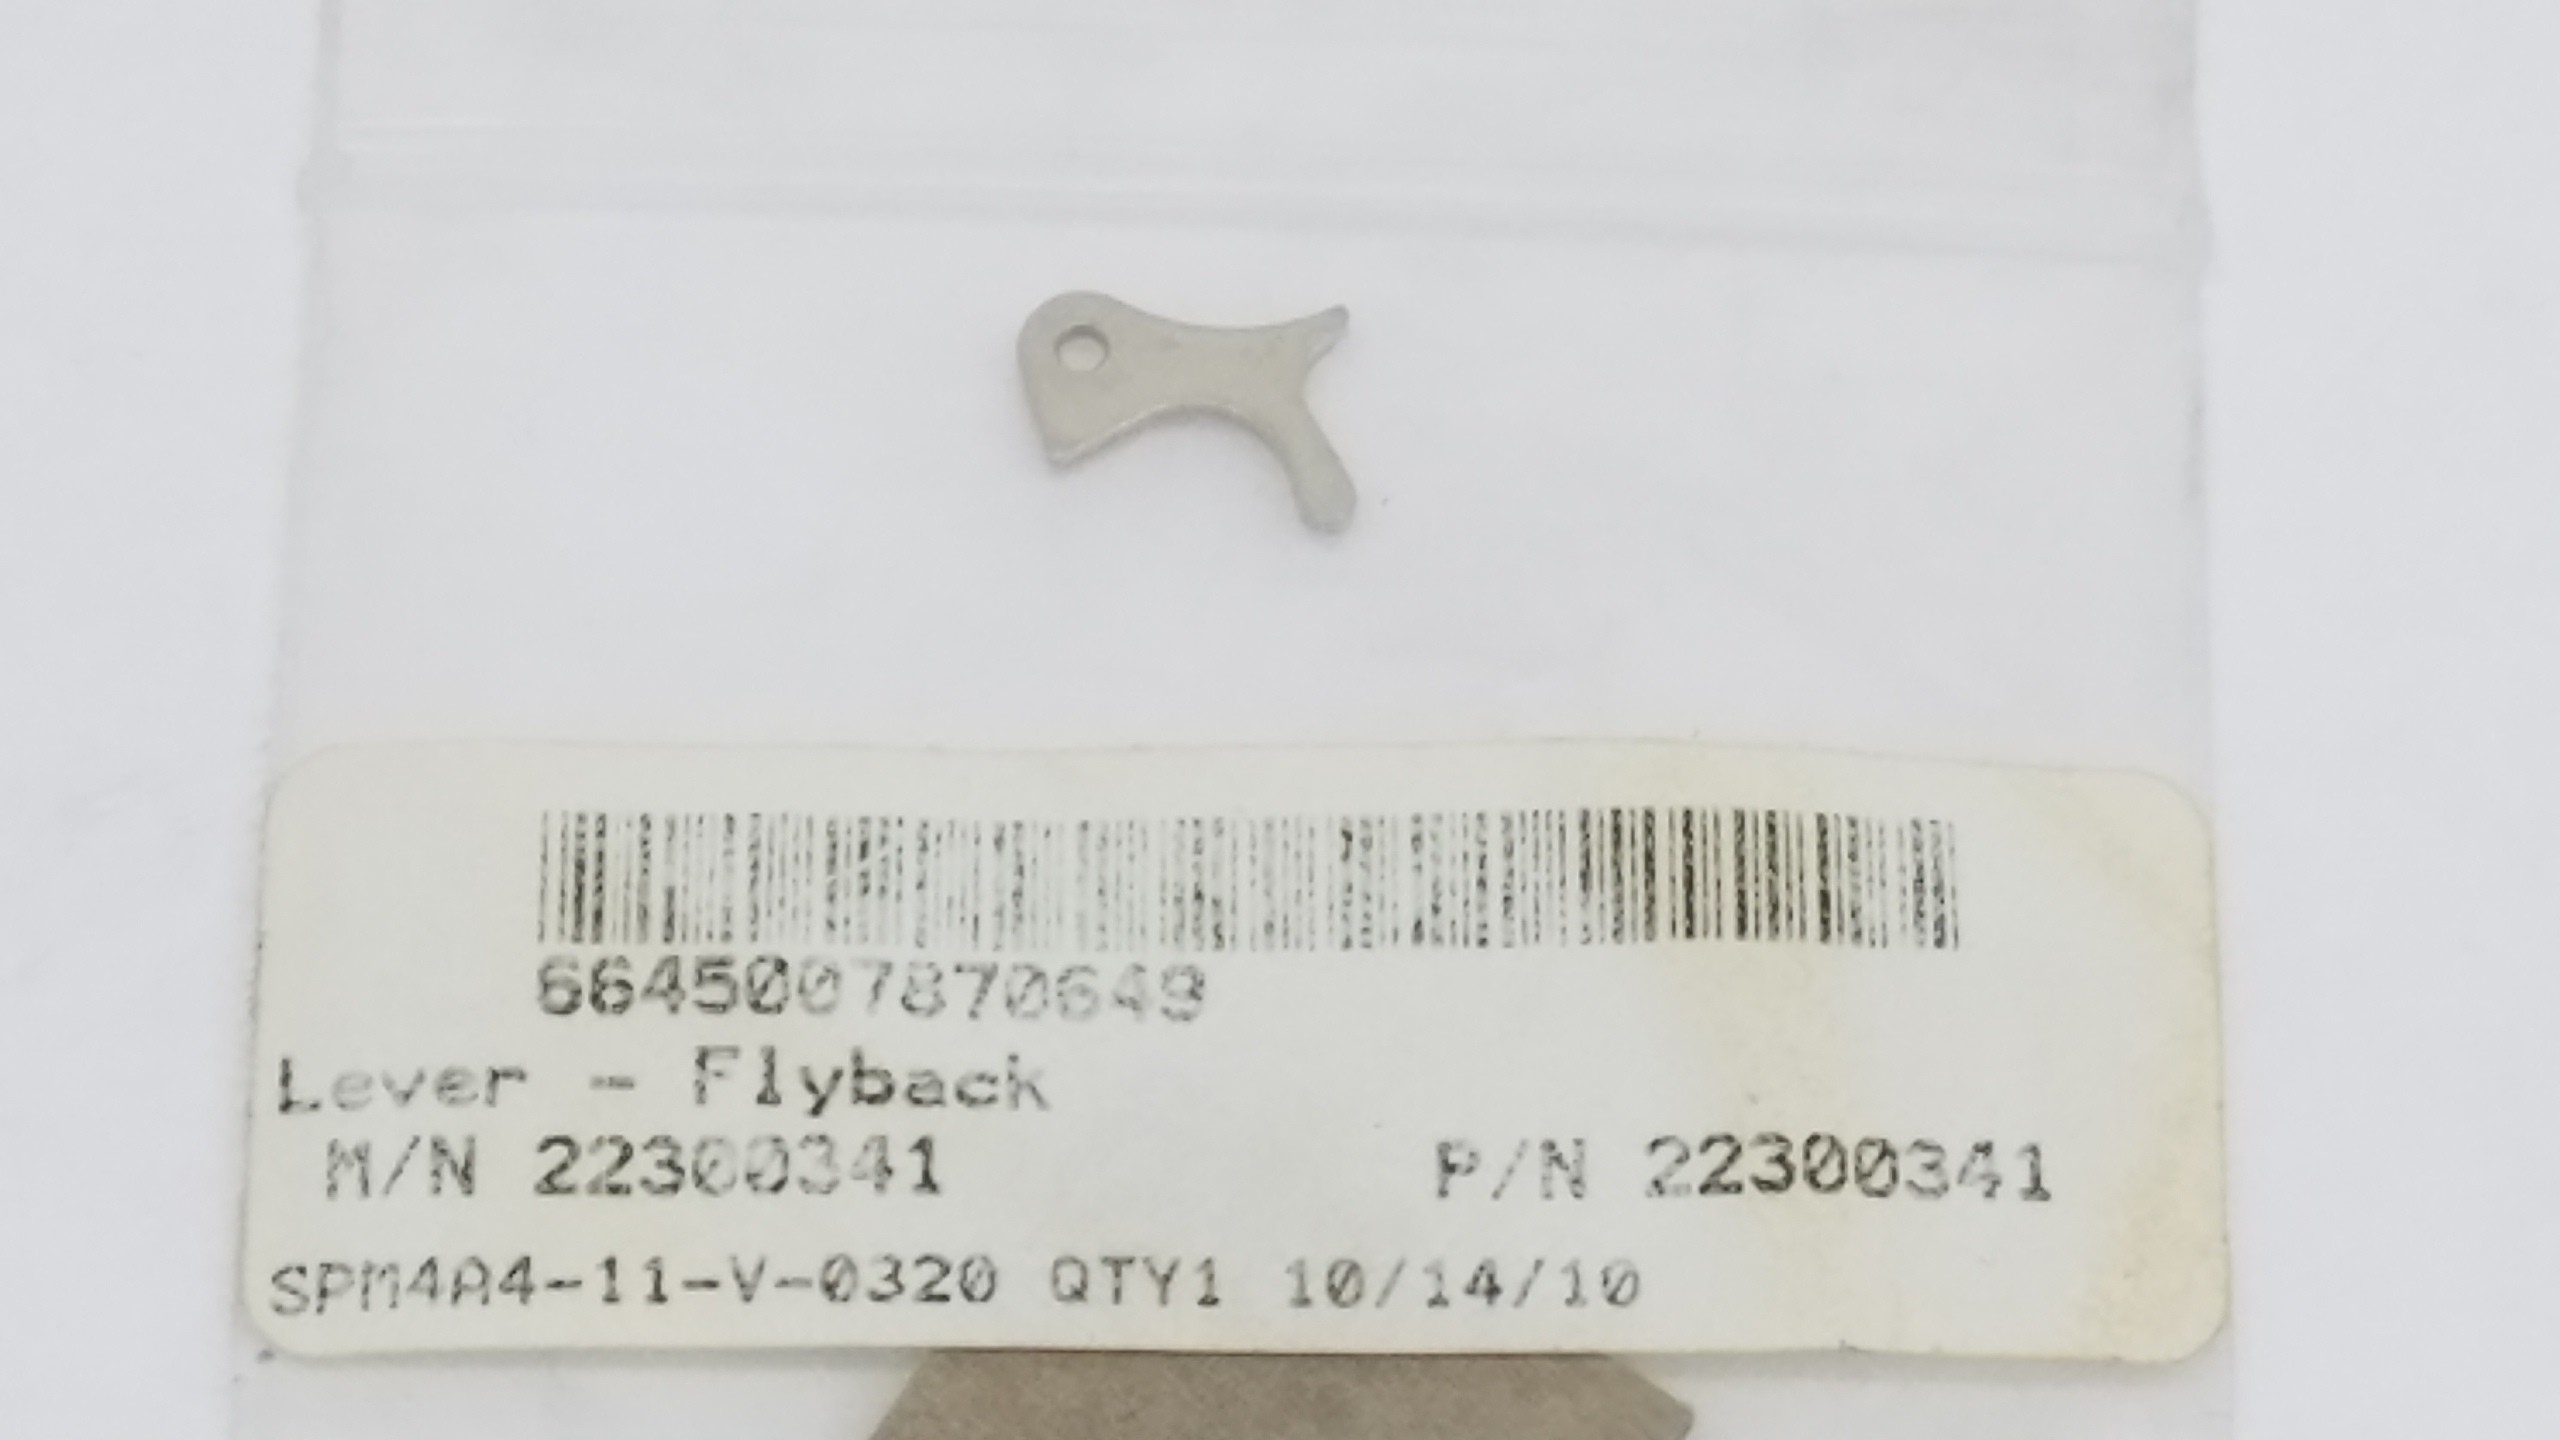 Waltham Aircraft Clock 22300341 Flyback Lever Lot of 10